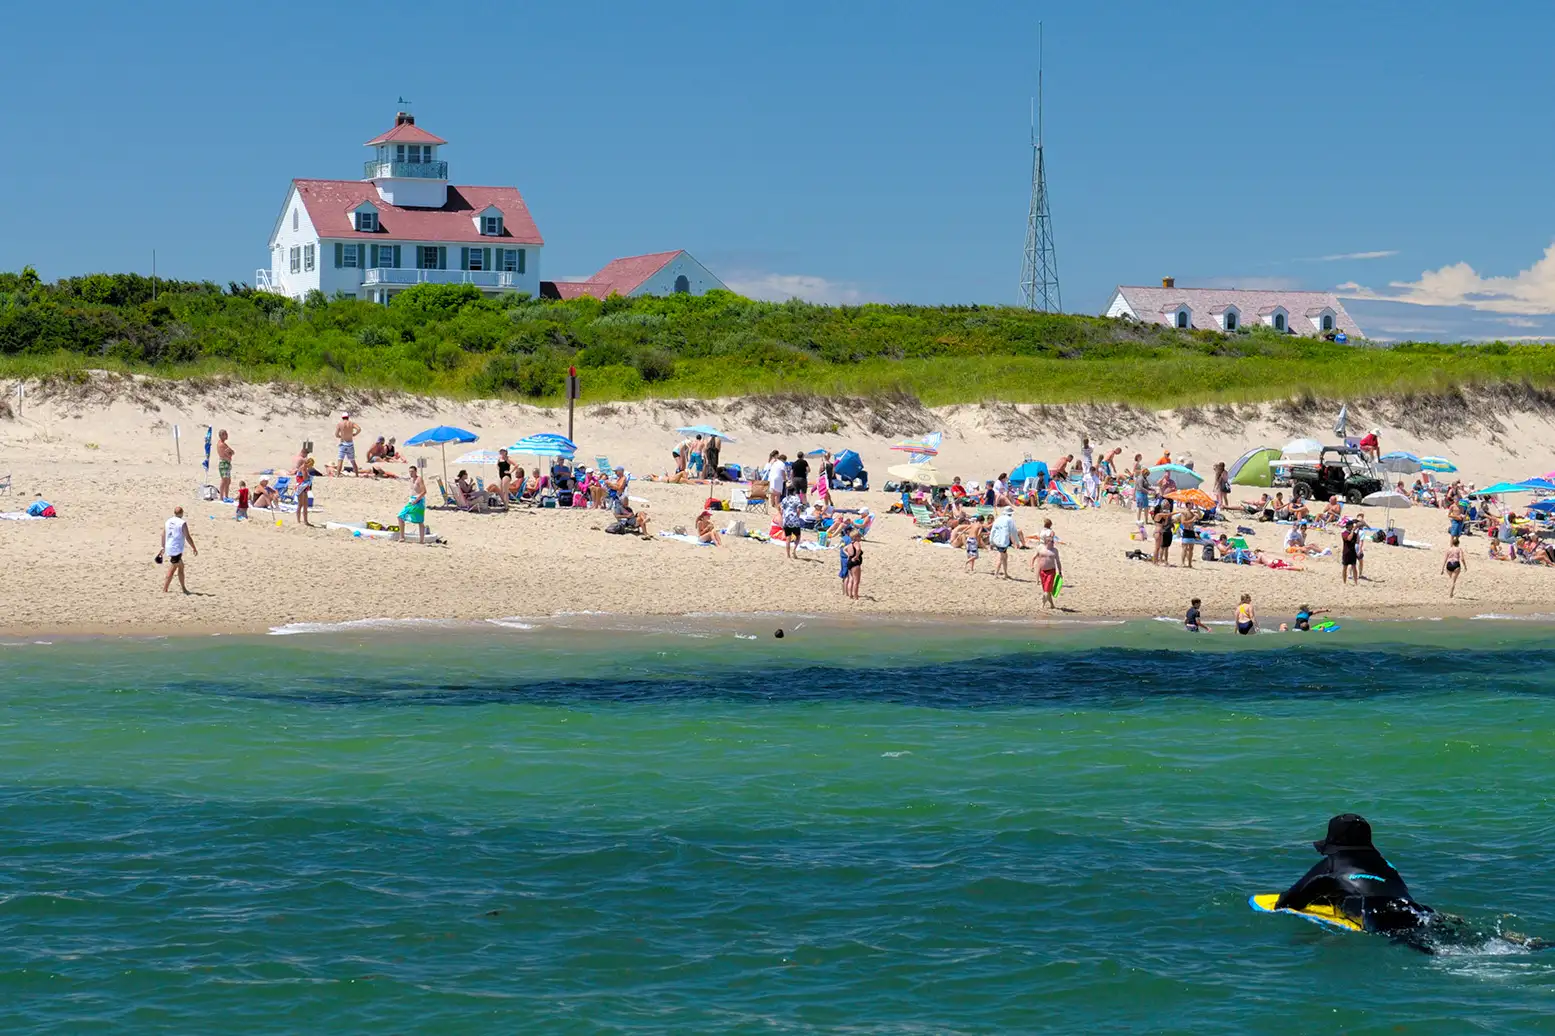 People on Coast Guard Beach, Cape Cod, Massachusetts, with surfer in the water heading towards the beach.